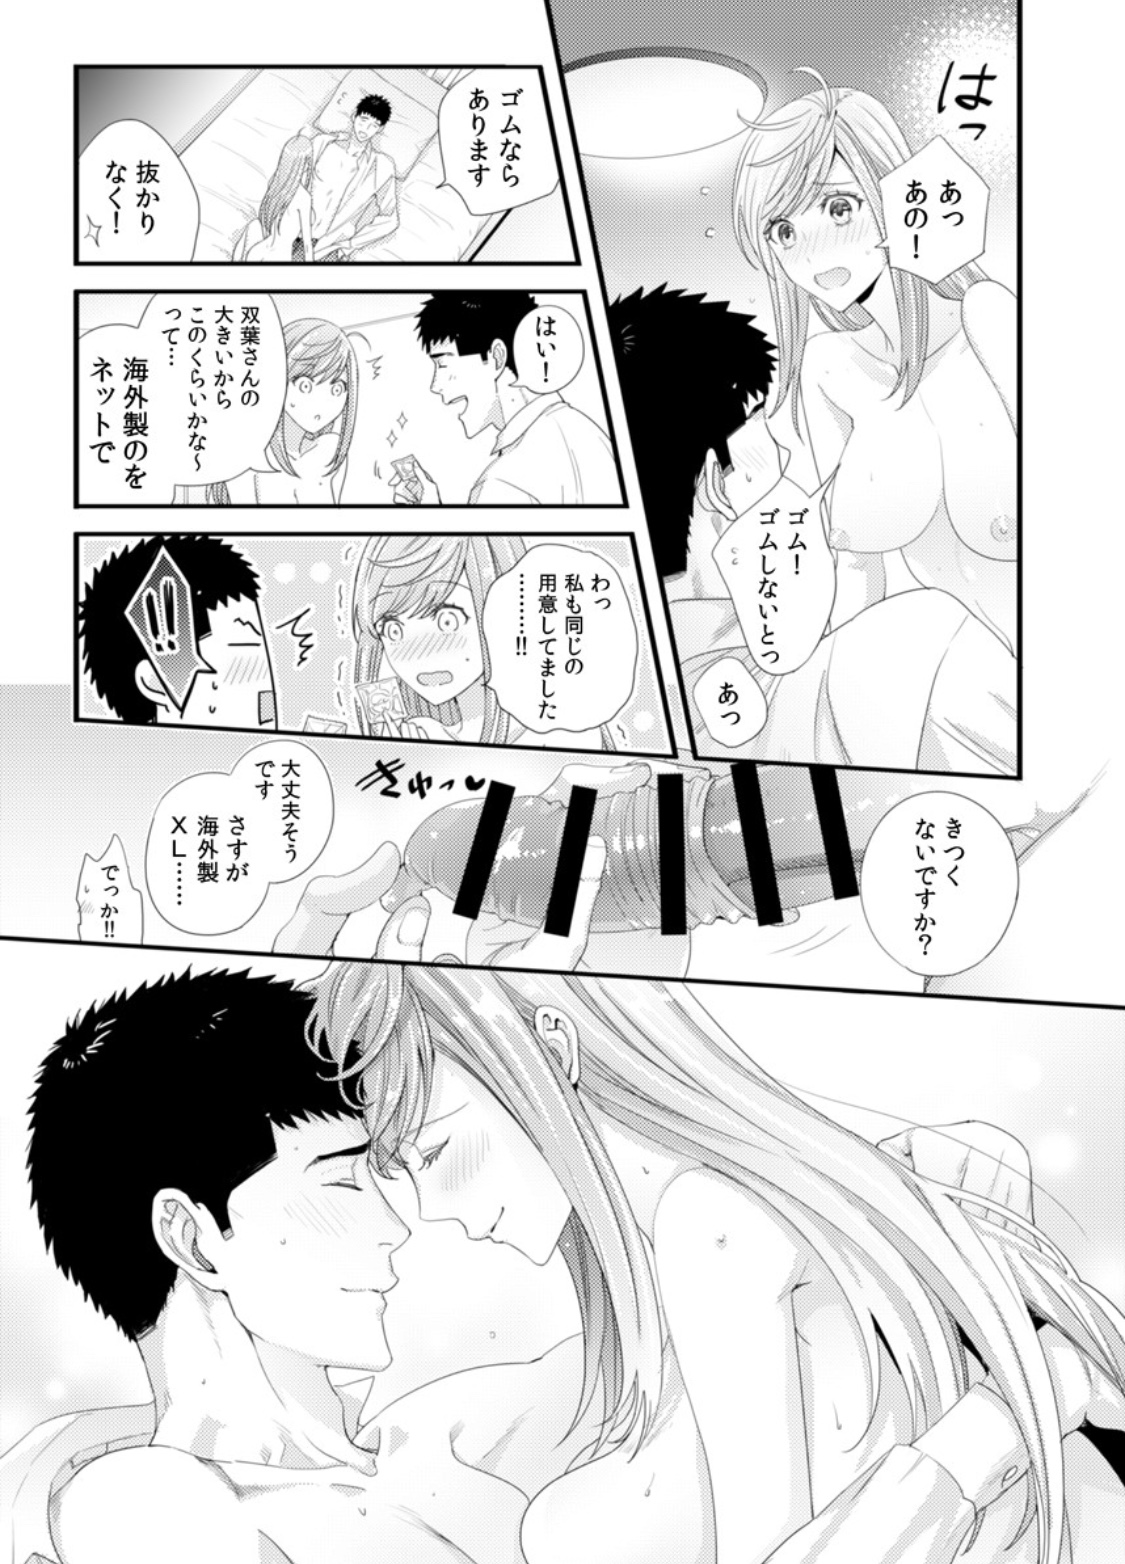 Please Let Me Hold You Futaba-San! Ch. 1+2 [二区] 抱かせてくださいッ双葉さん！【特別修正版】